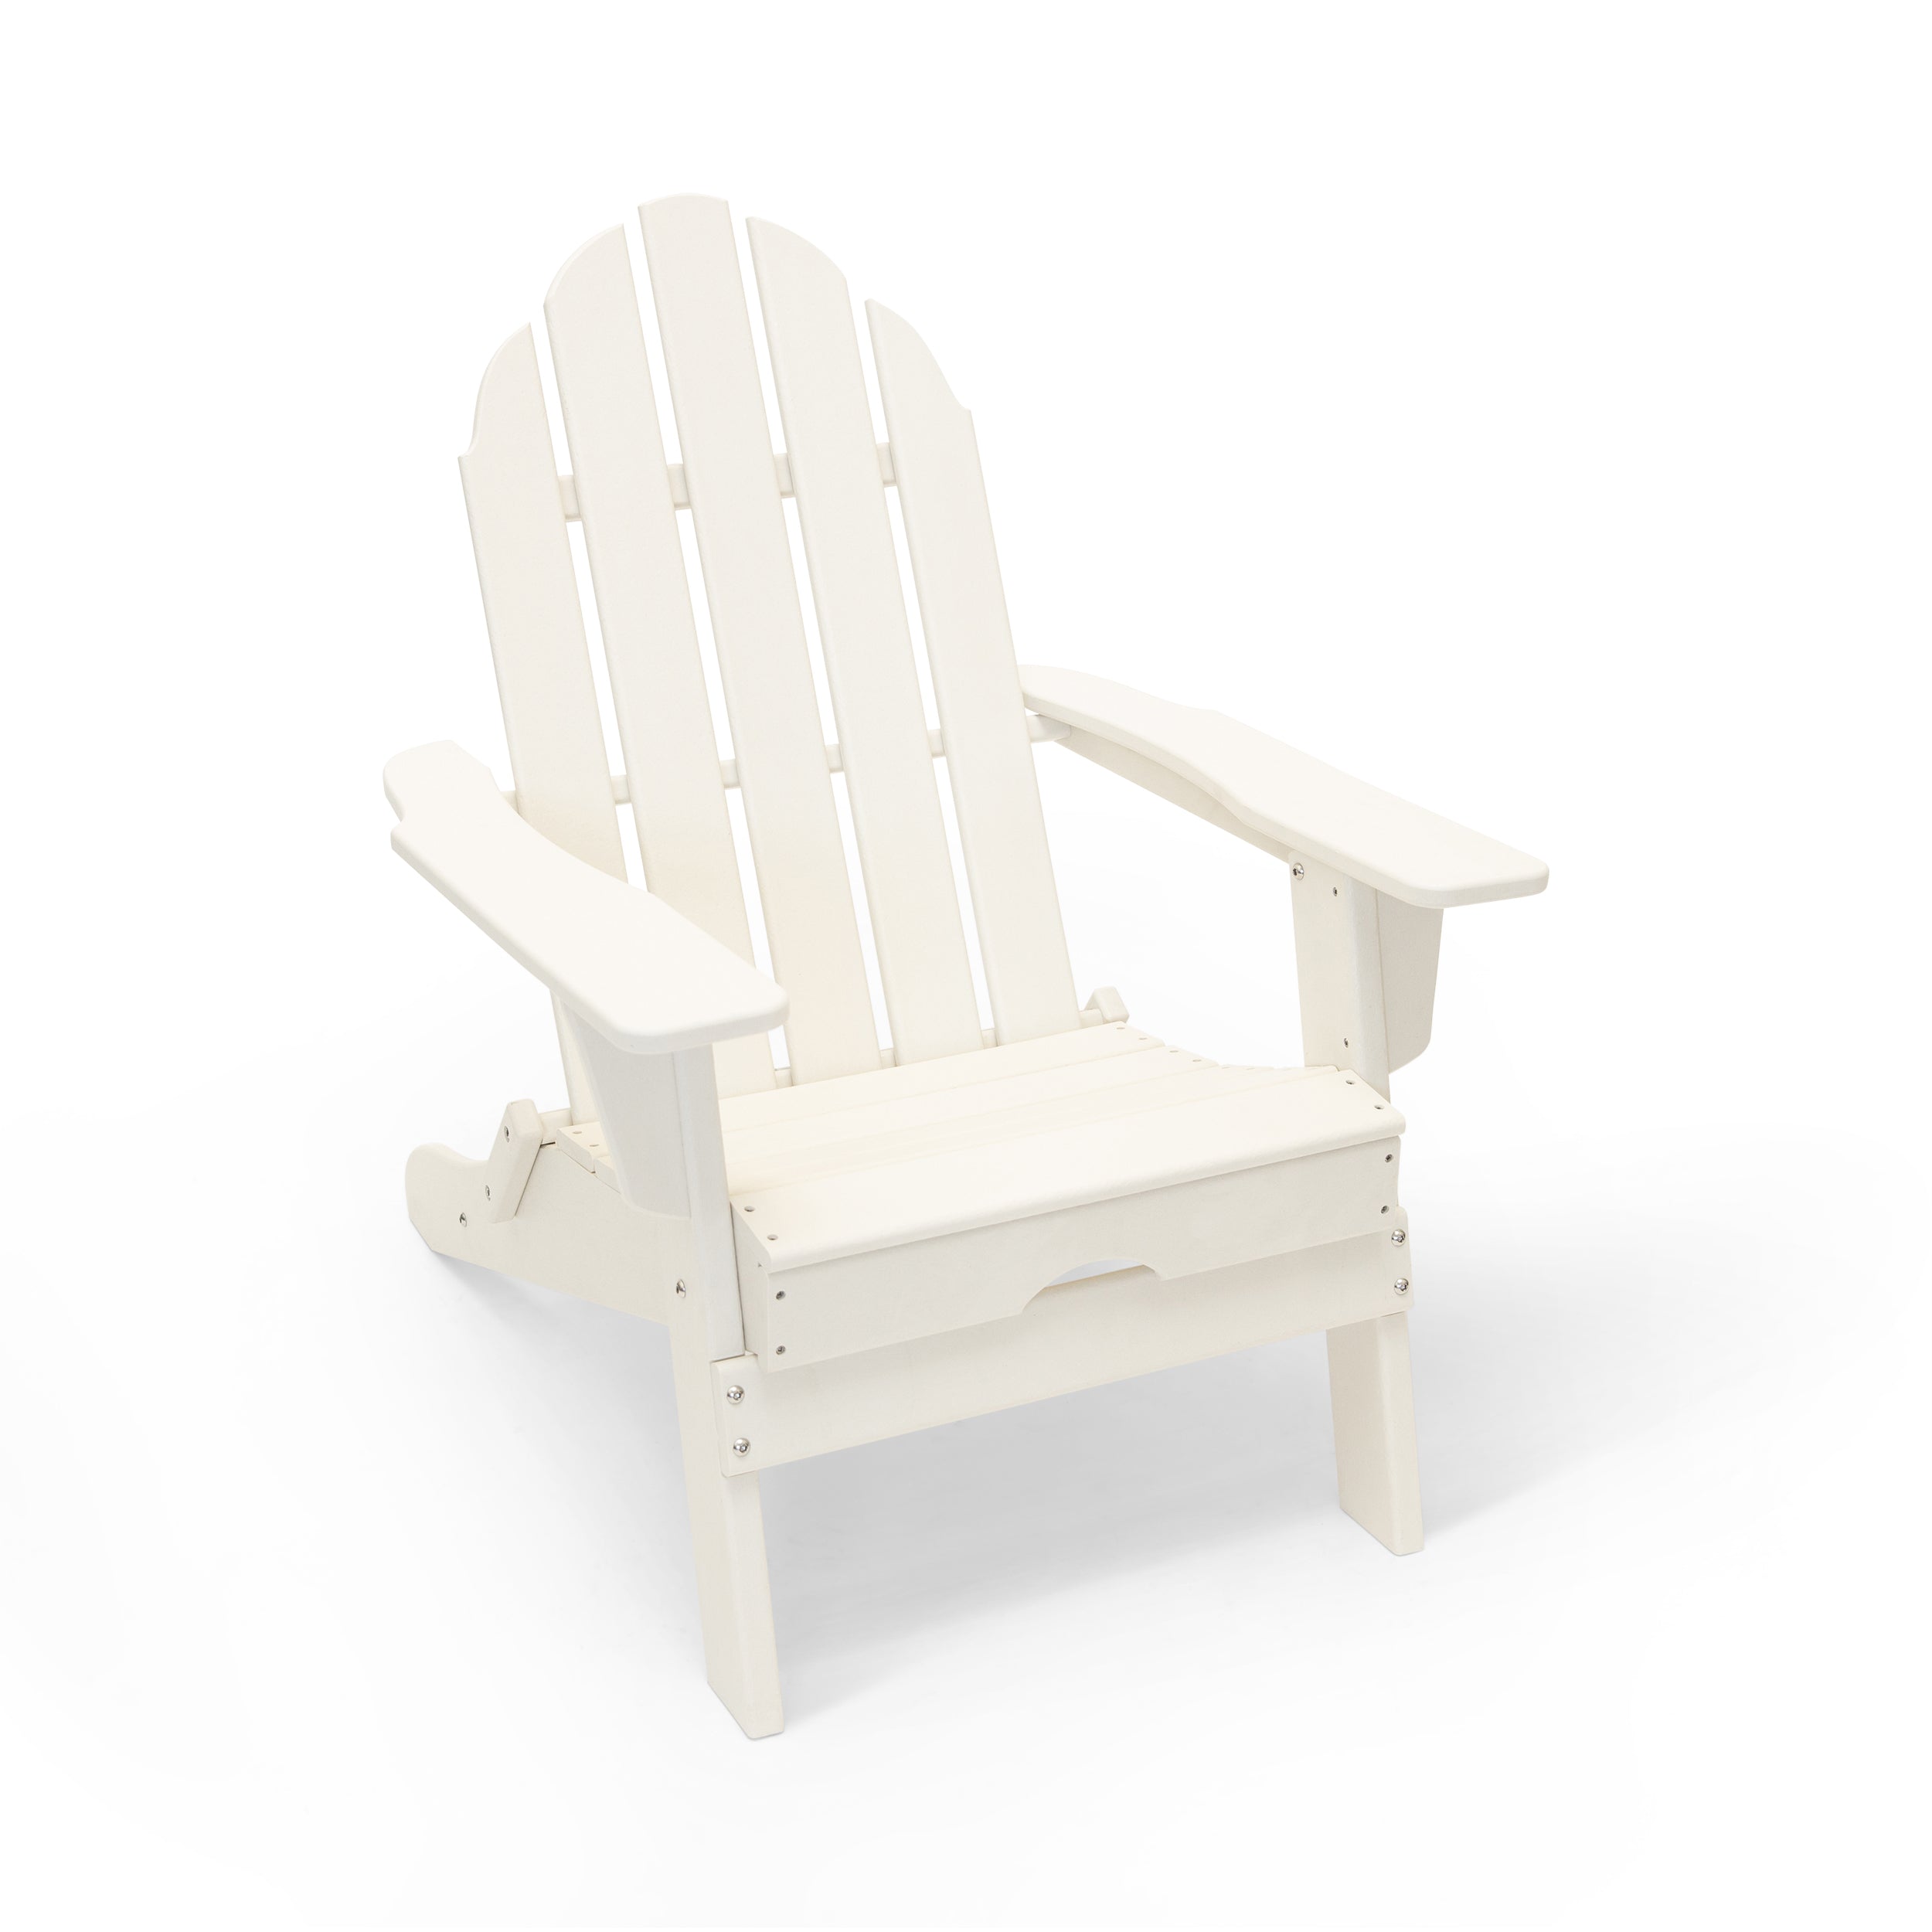 Balboa HDPE Recycled Plastic Folding Adirondack Chair and Table Set